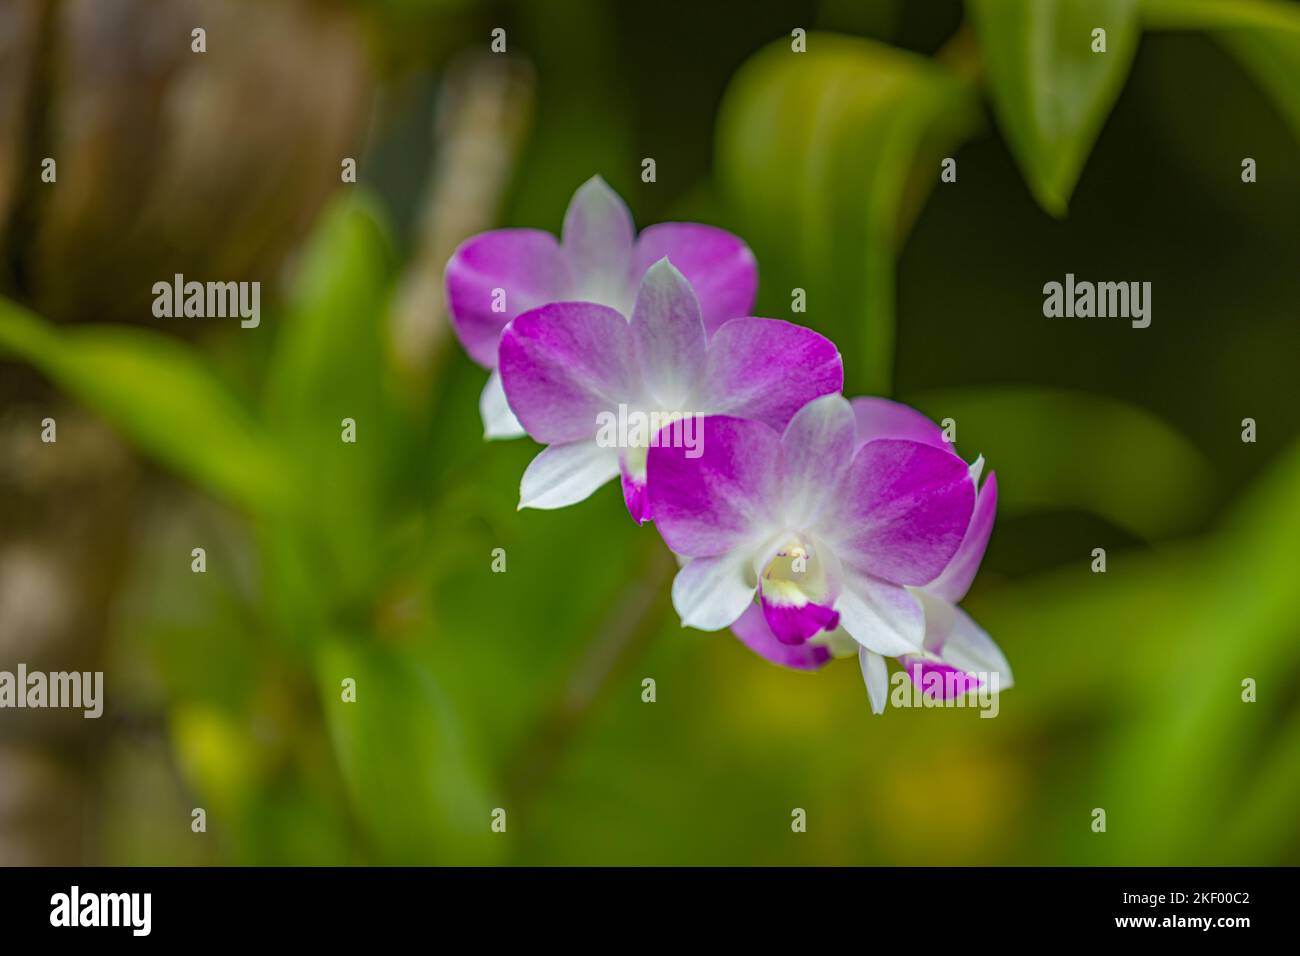 Orchid flower in tropical garden, bright pink purple floral macro with blurred green lush foliage. Dream nature closeup, romantic tropical flowers Stock Photo